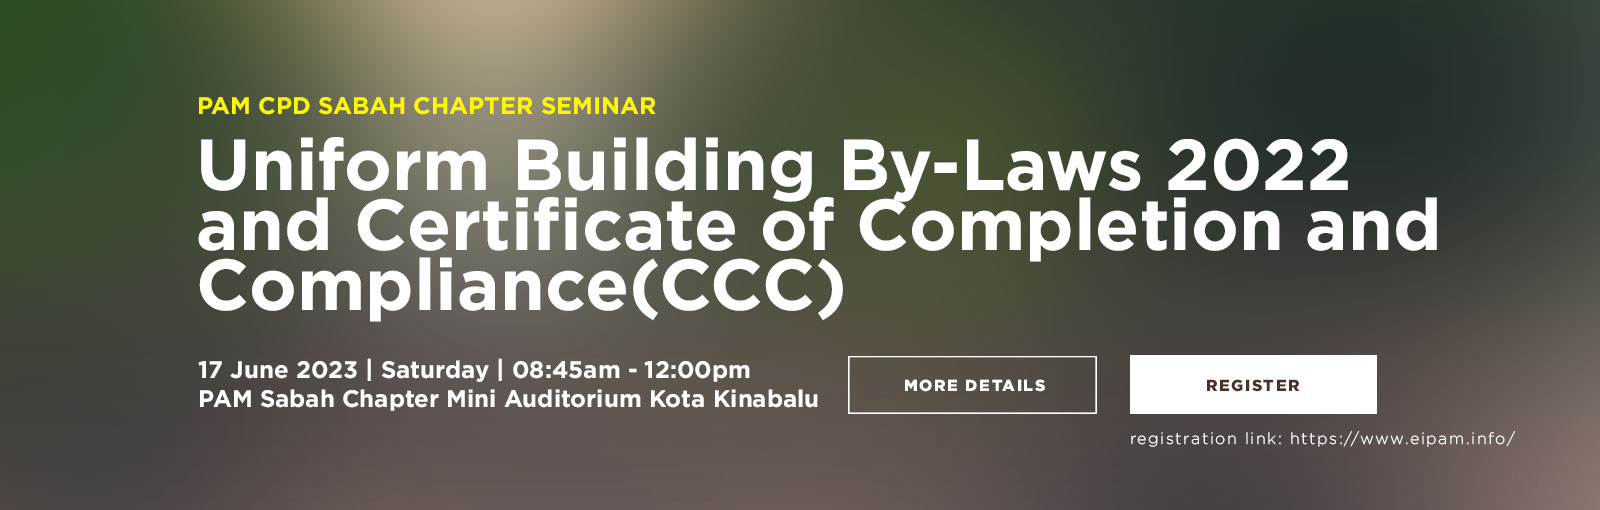 Uniform Building By-laws 2022 And Certificate Of Completion And Compliance (CCC)